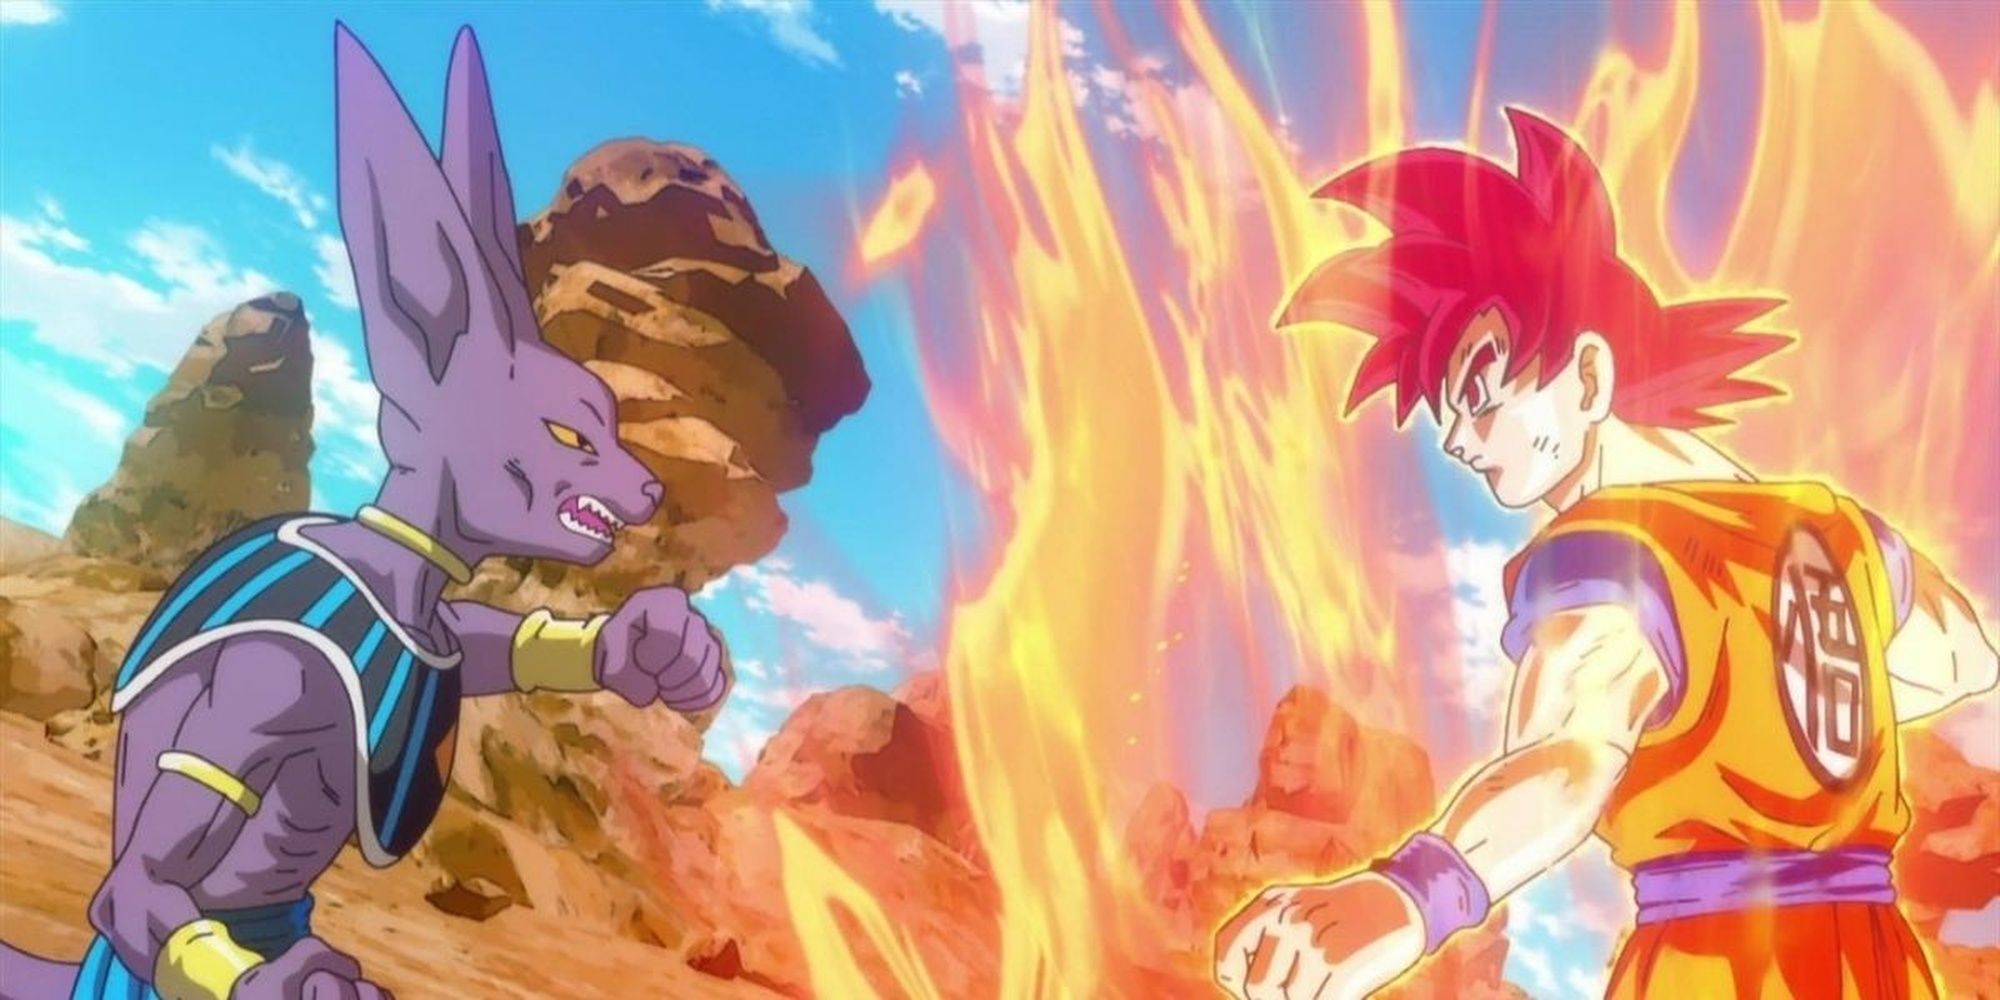 Goku and Beerus square off